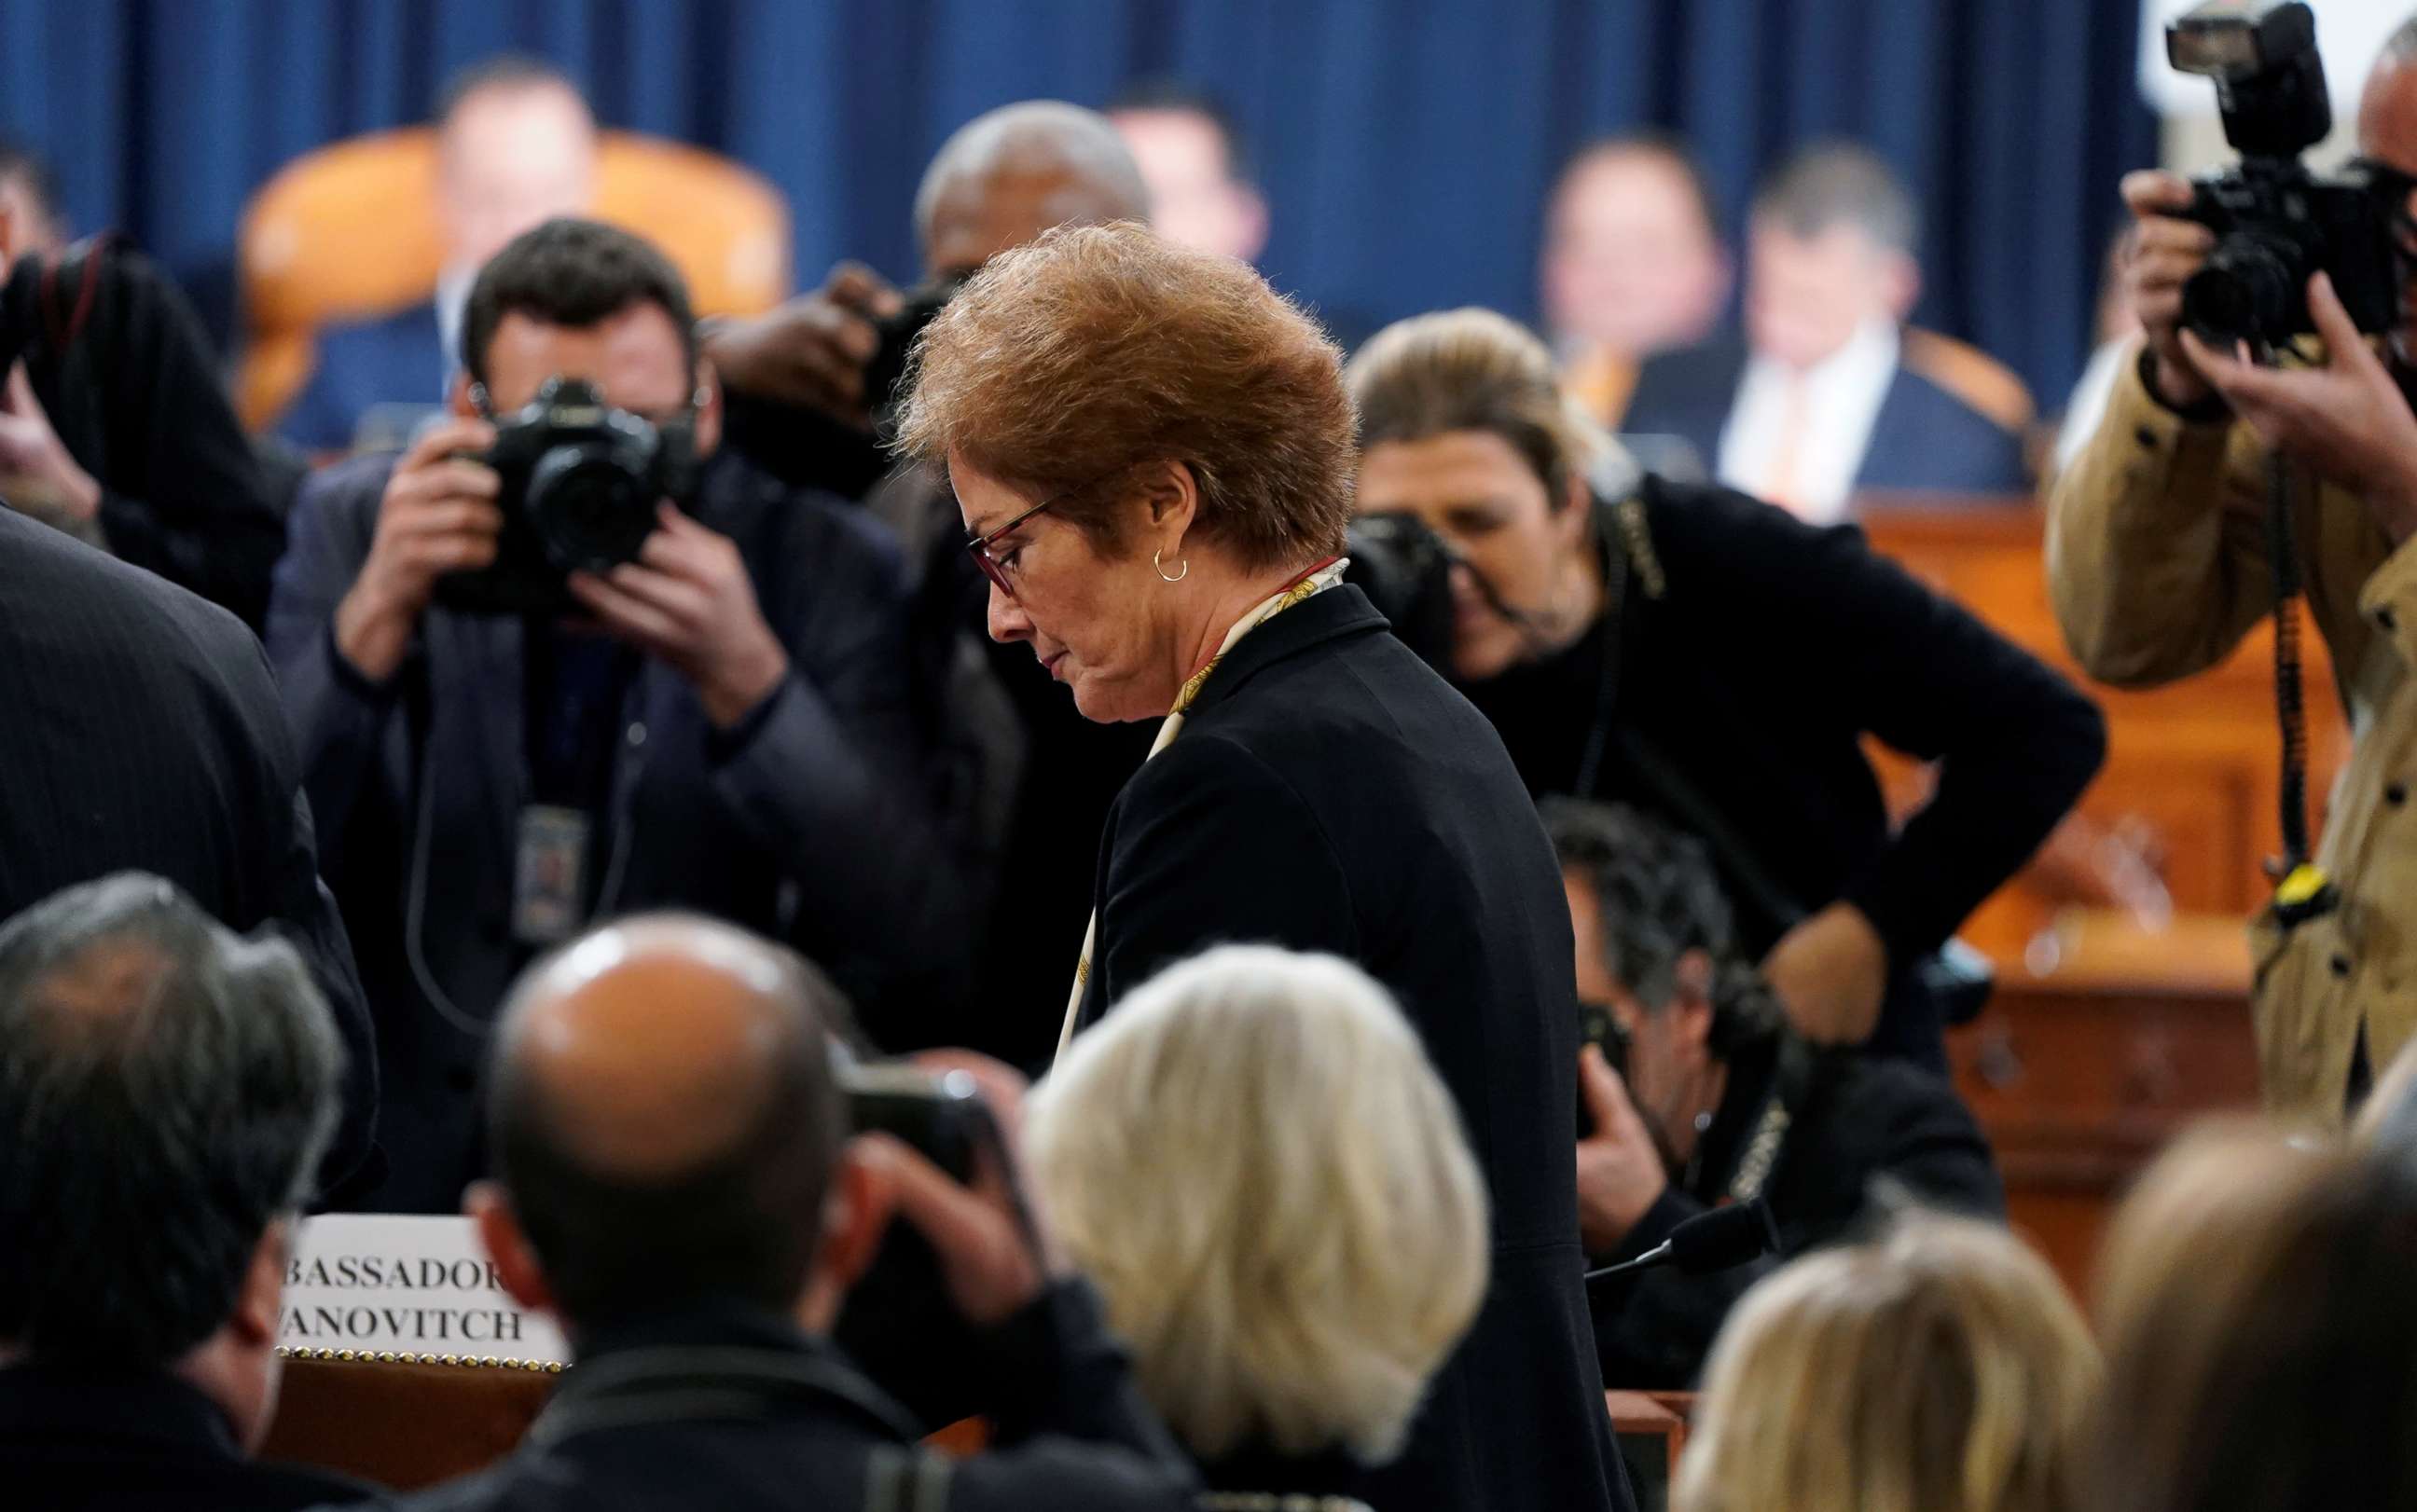 PHOTO: Marie Yovanovitch, former U.S. ambassador to Ukraine, takes her seat to testify at a hearing by the House Intelligence Committee as part of the impeachment inquiry into U.S. President Donald Trump on Capitol Hill in Washington, Nov. 15, 2019.